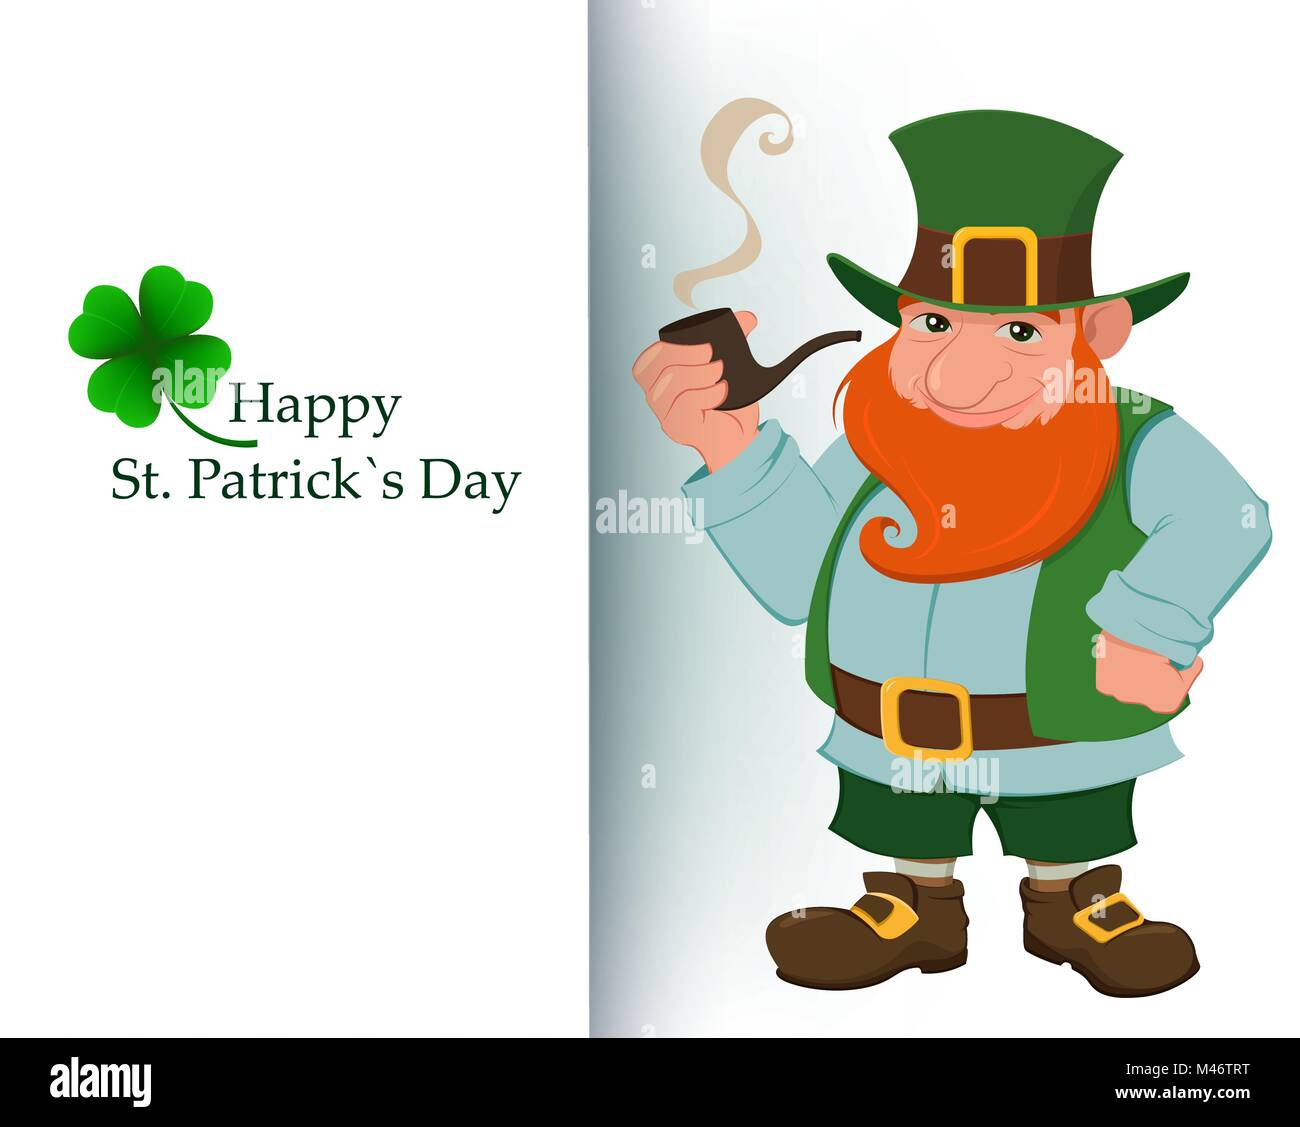 Happy Saint Patrick's Day. Cartoon character with green hat. Funny